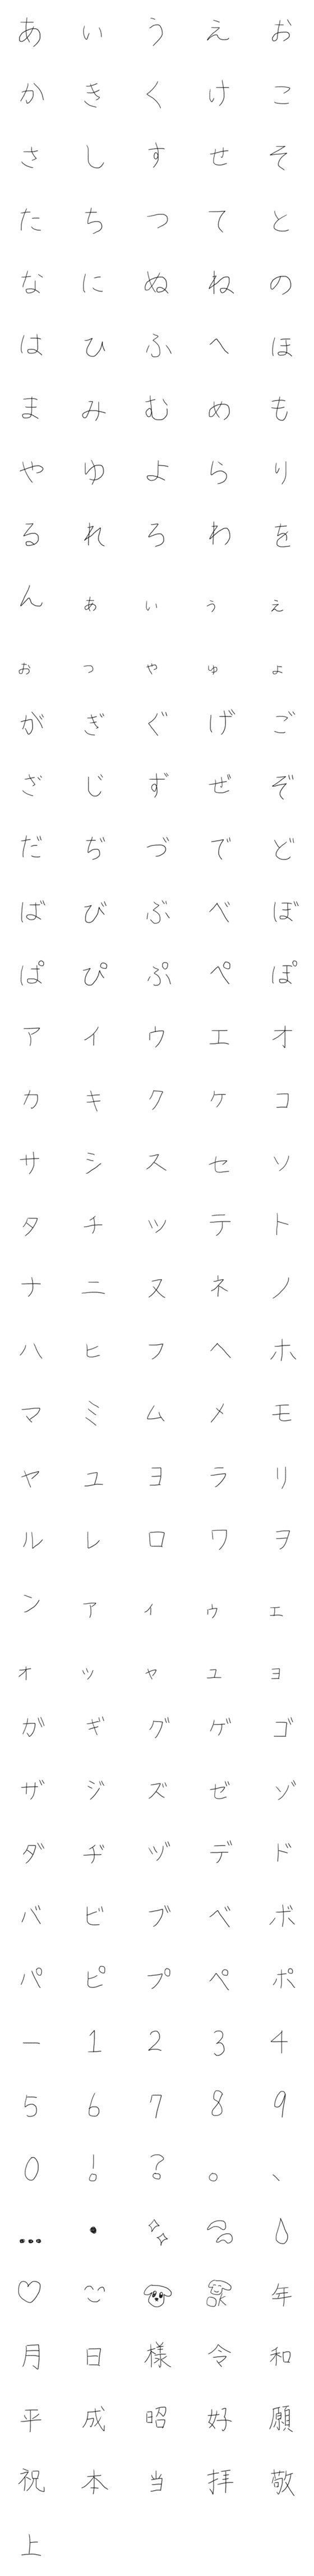 [LINE絵文字]ふつうの字の画像一覧